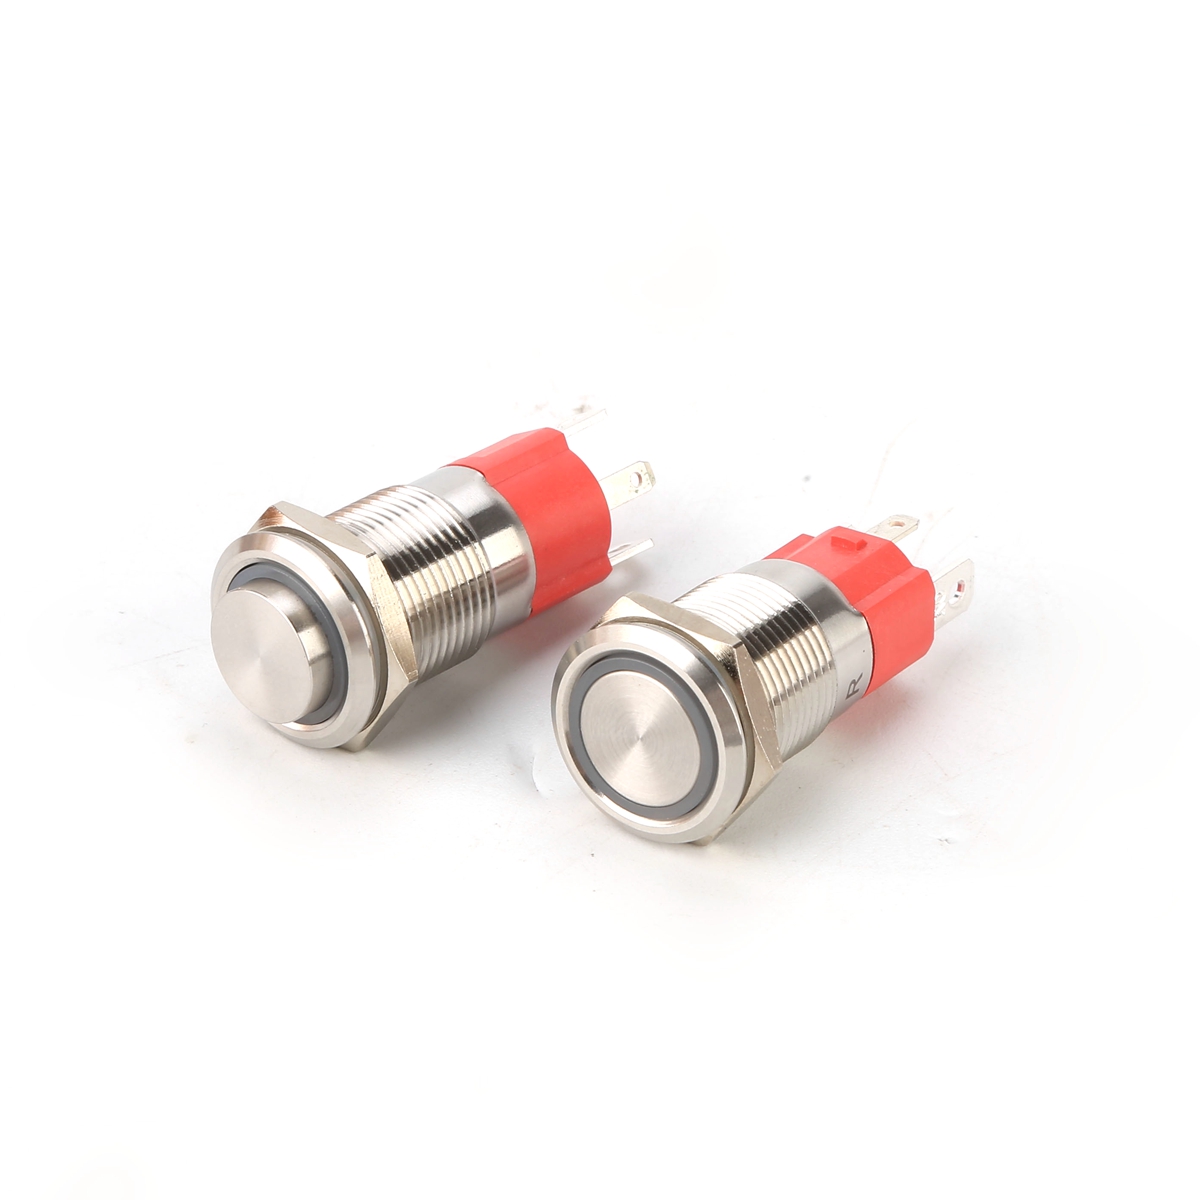 16MM-10A-250V-12V-4Pin-LED-Light-Button-Switch-Momentary-Reset-Metal-Push-Button-Switch-1493146-2